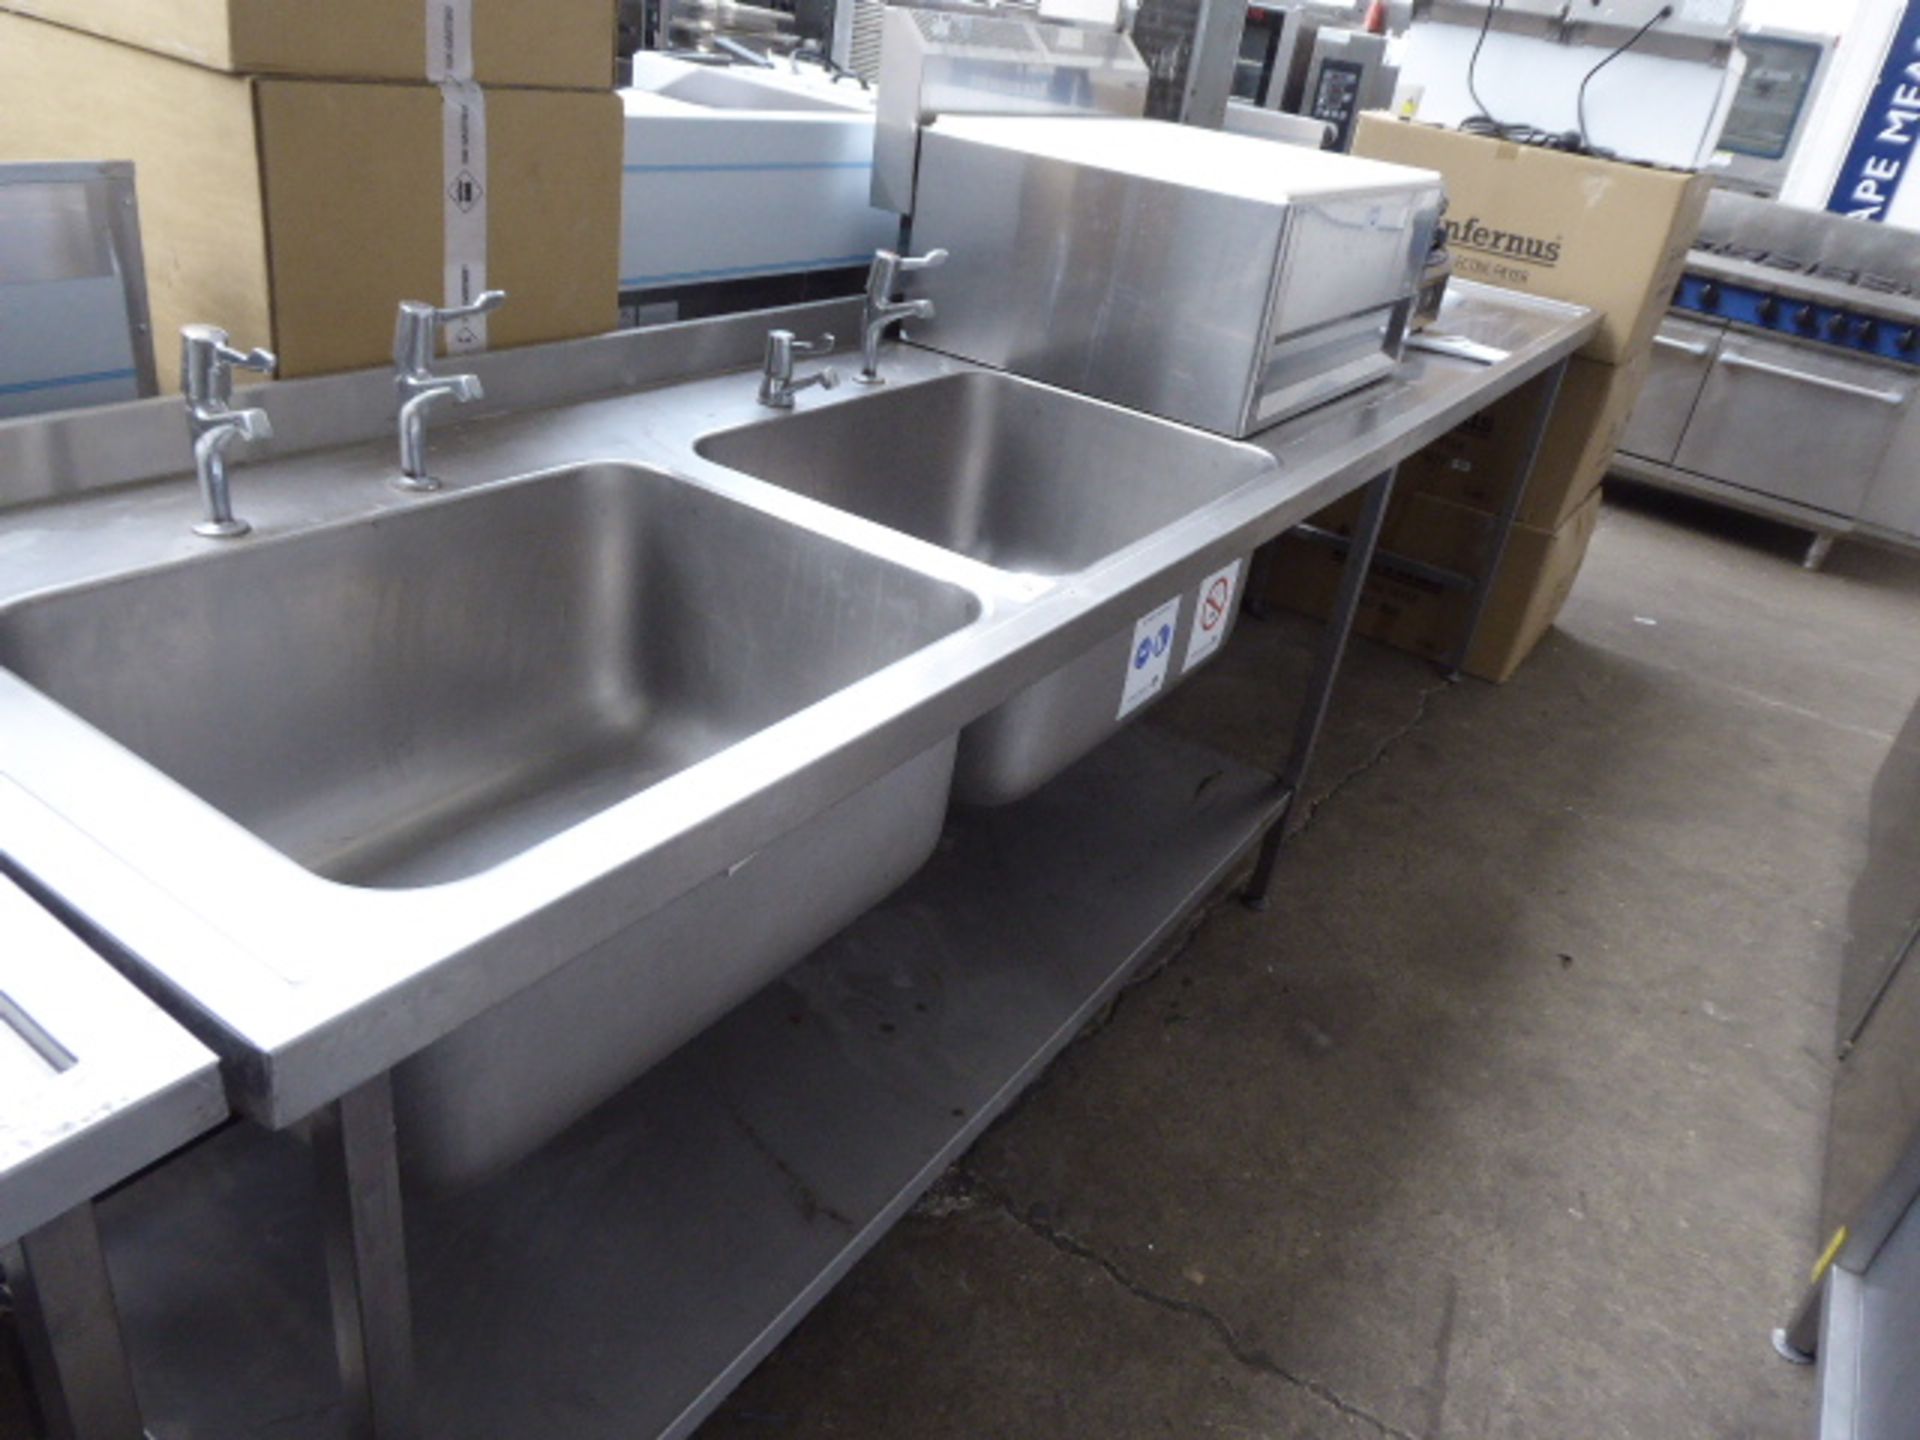 315cm stainless steel double bowl sink unit with tap sets, draining board and a hand basin with